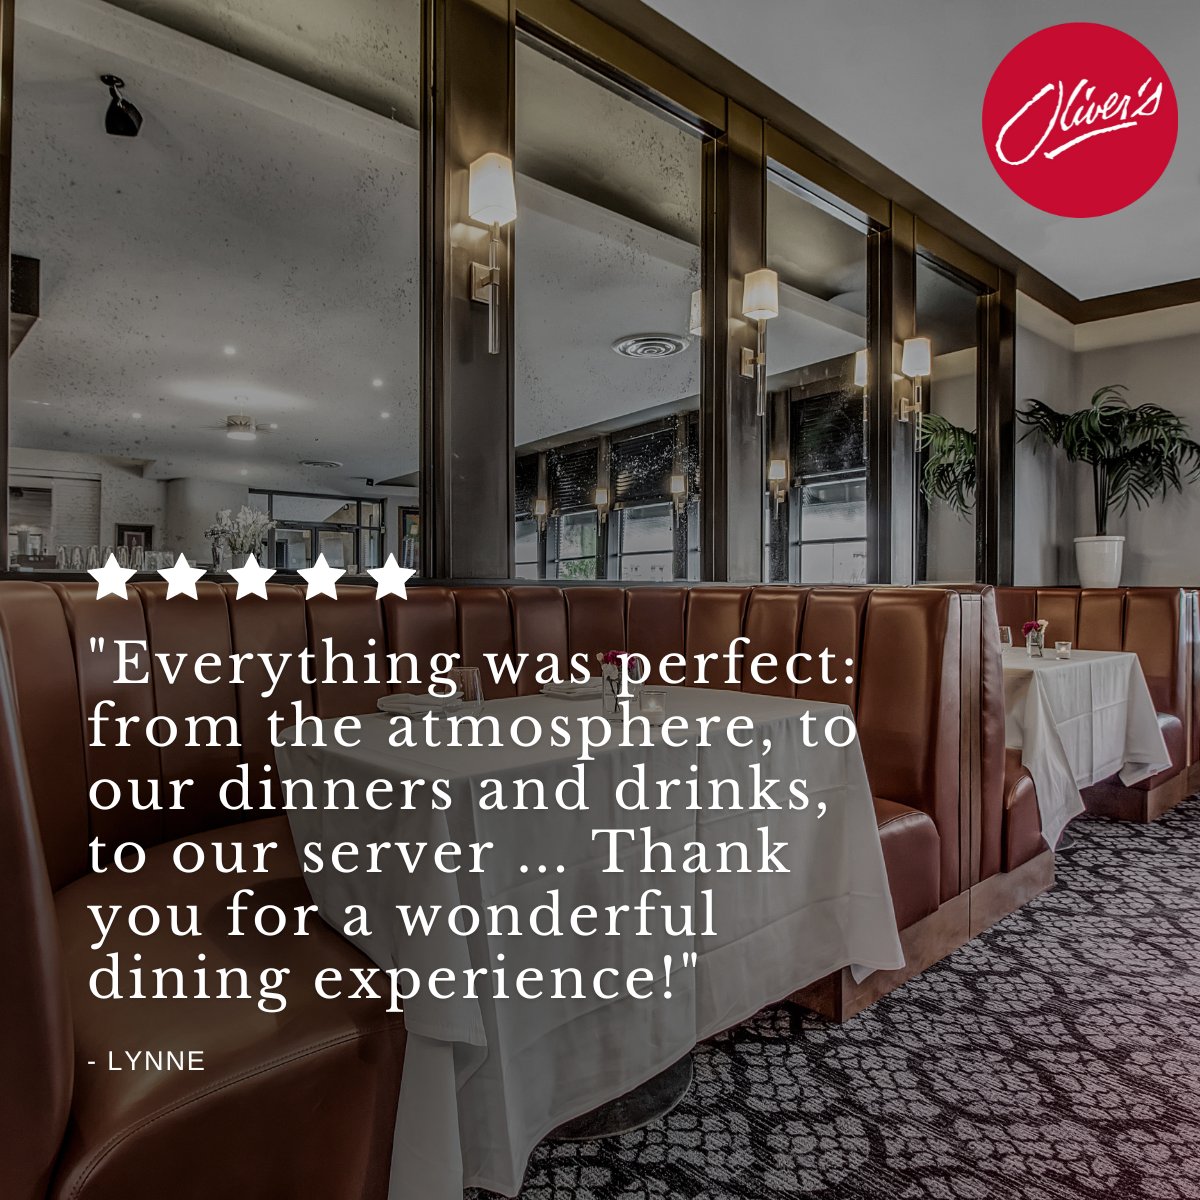 From atmosphere to service, we're all about creating unforgettable evenings.

#oliversrestaurant #buffalofood #buffalofoodie #buffalove #inthebuf #finedining #finedininglovers